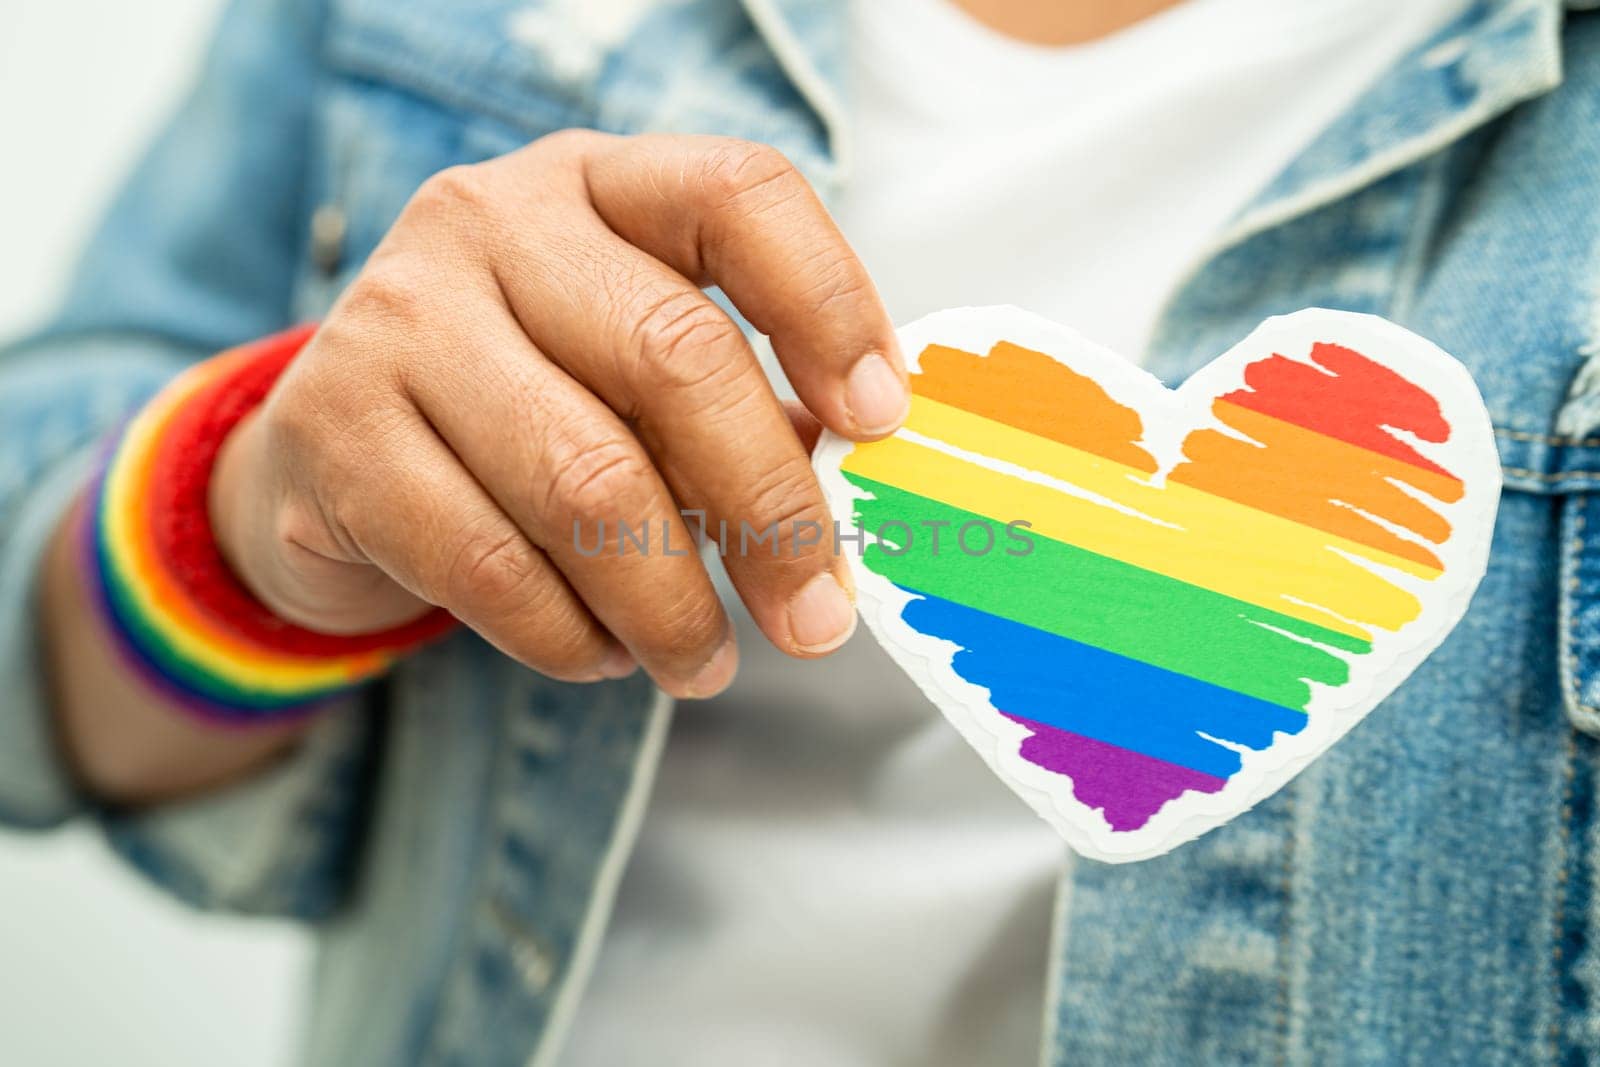 Asian lady wearing rainbow flag wristbands and hold red heart, symbol of LGBT pride month celebrate annual in June social of gay, lesbian, bisexual, transgender, human rights. by pamai